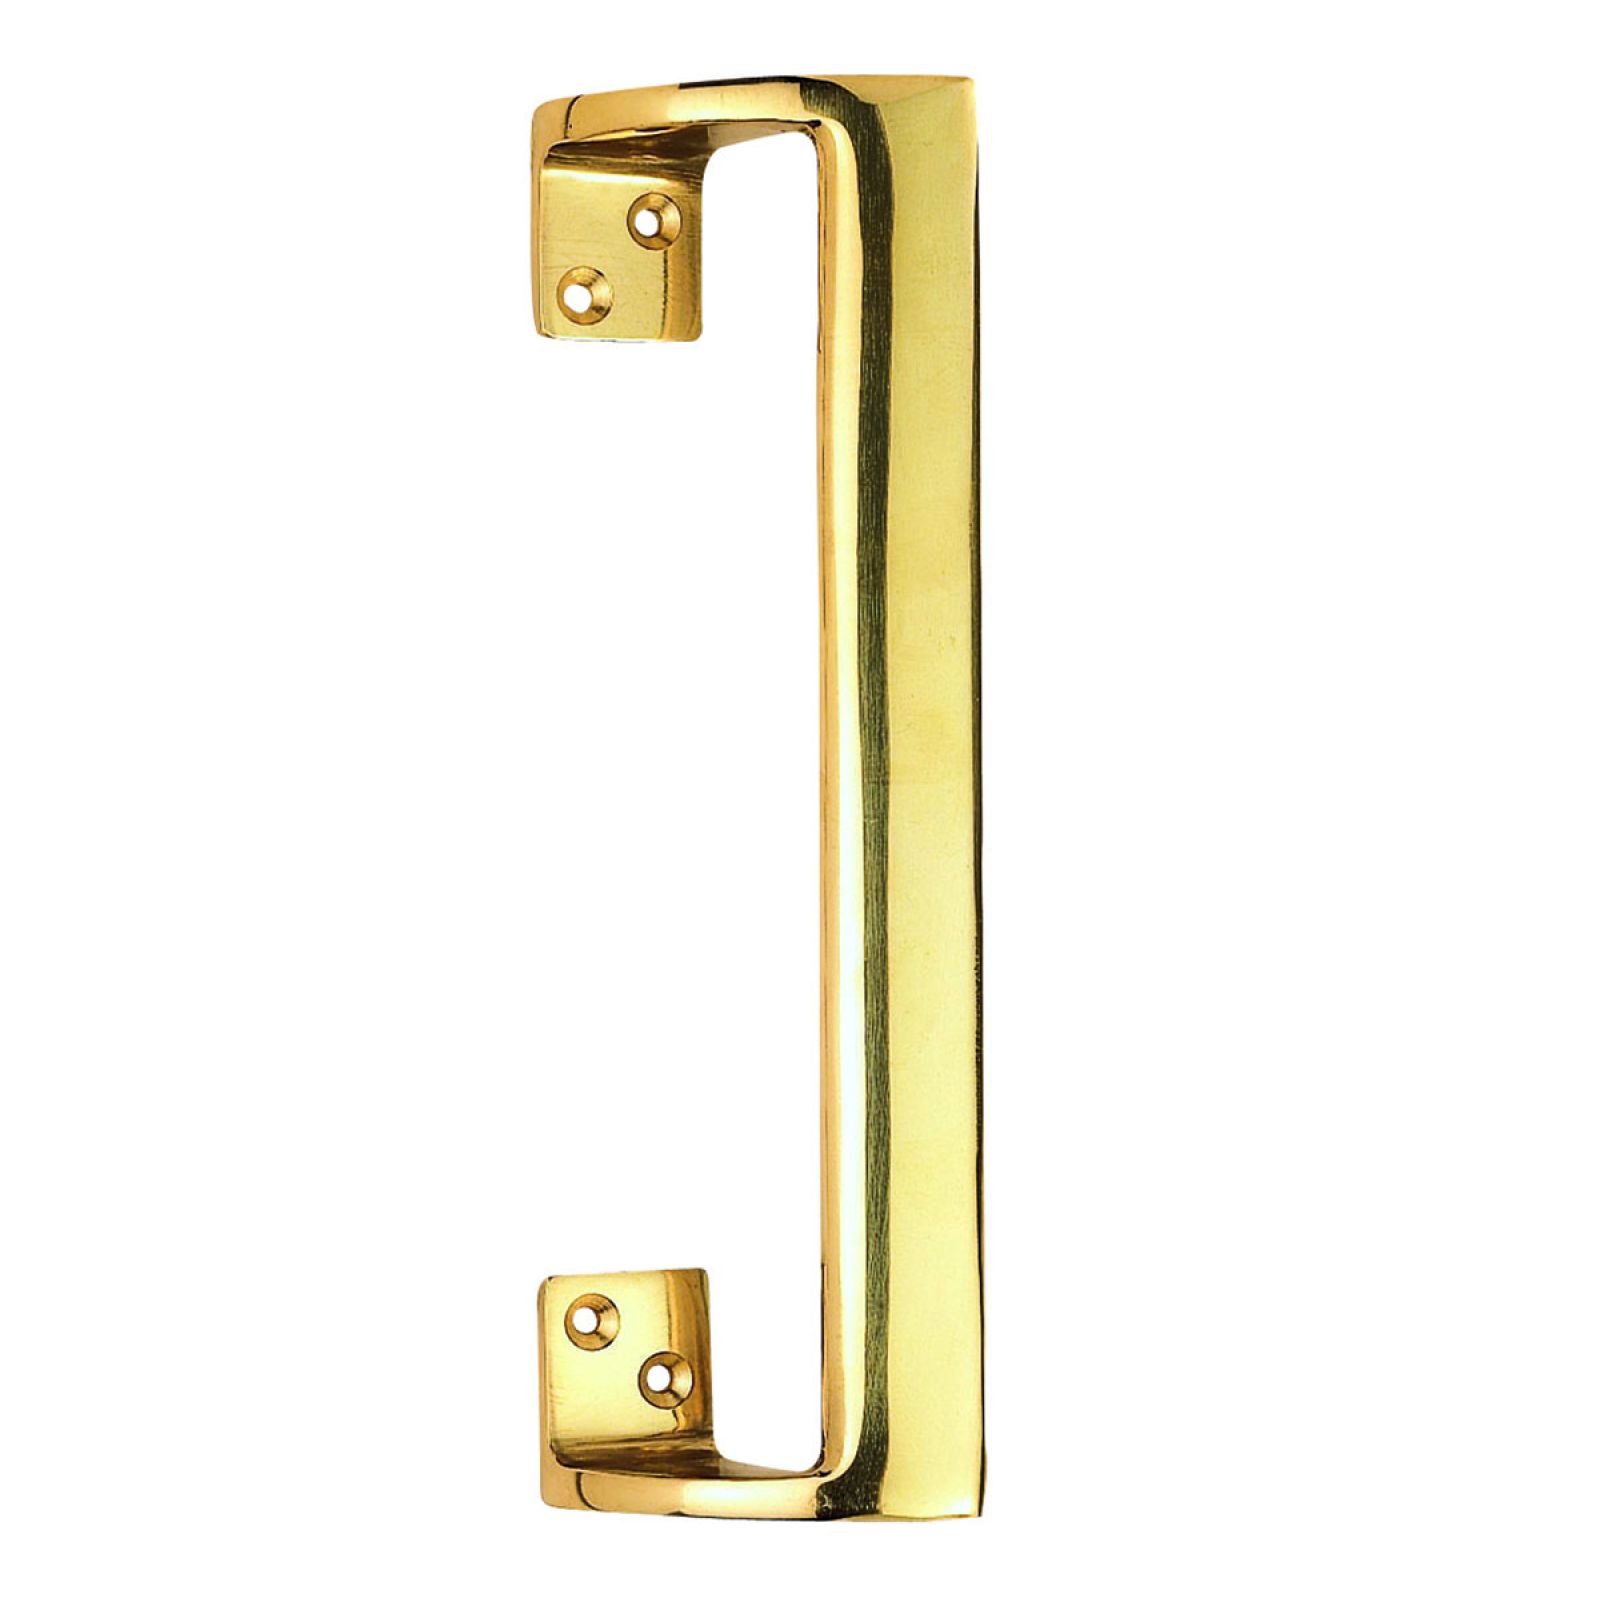 Cranked Pull handle in a choice of 2 sizes